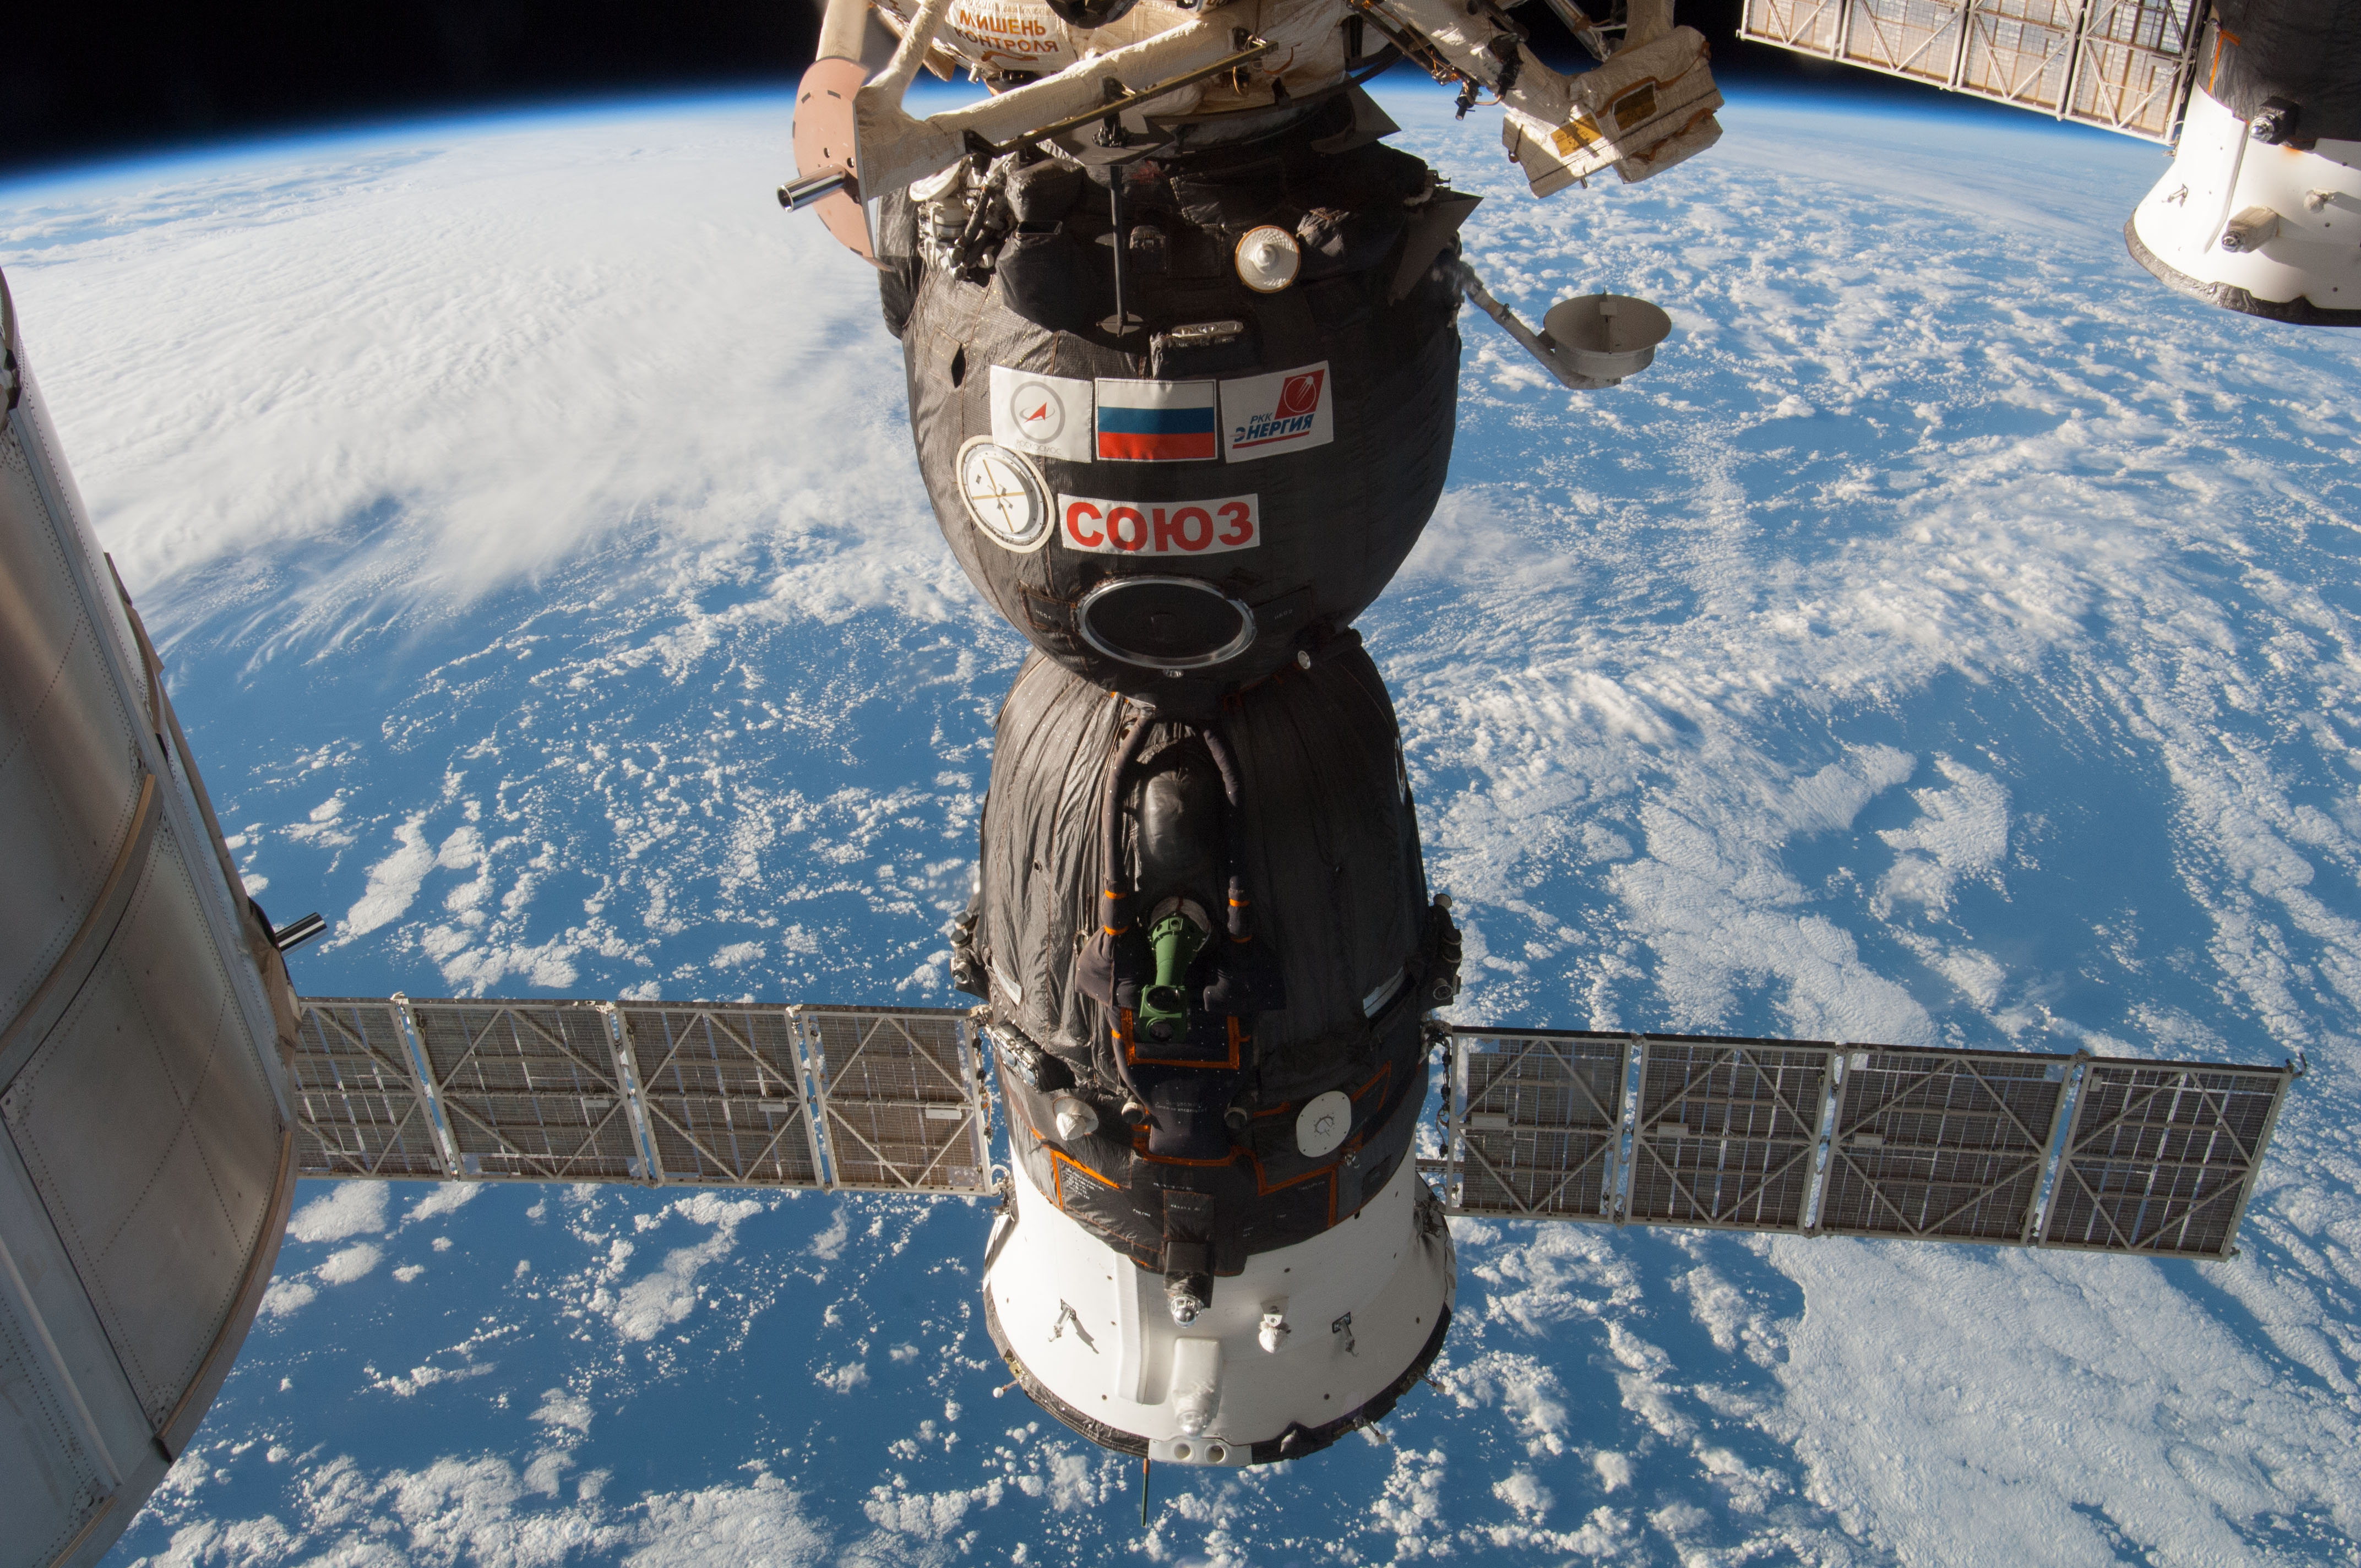 Russian spacewalkers cut samples of mystery hole in Soyuz spaceship at ISS